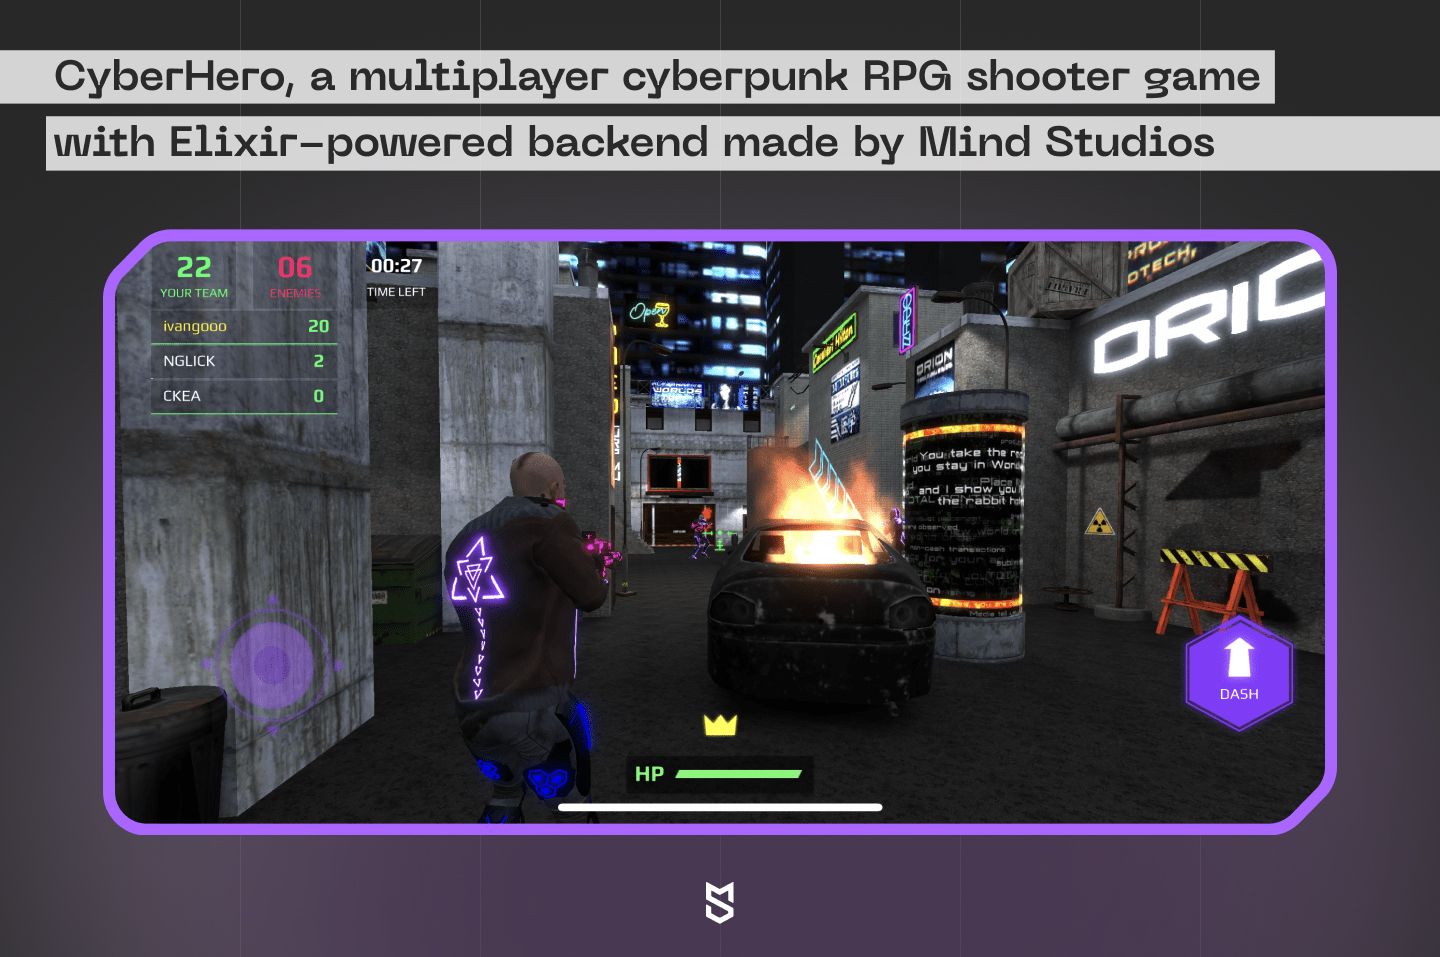 CyberHero, a multiplayer cyberpunk RPG shooter game with Elixir-powered backend made by Mind Studios